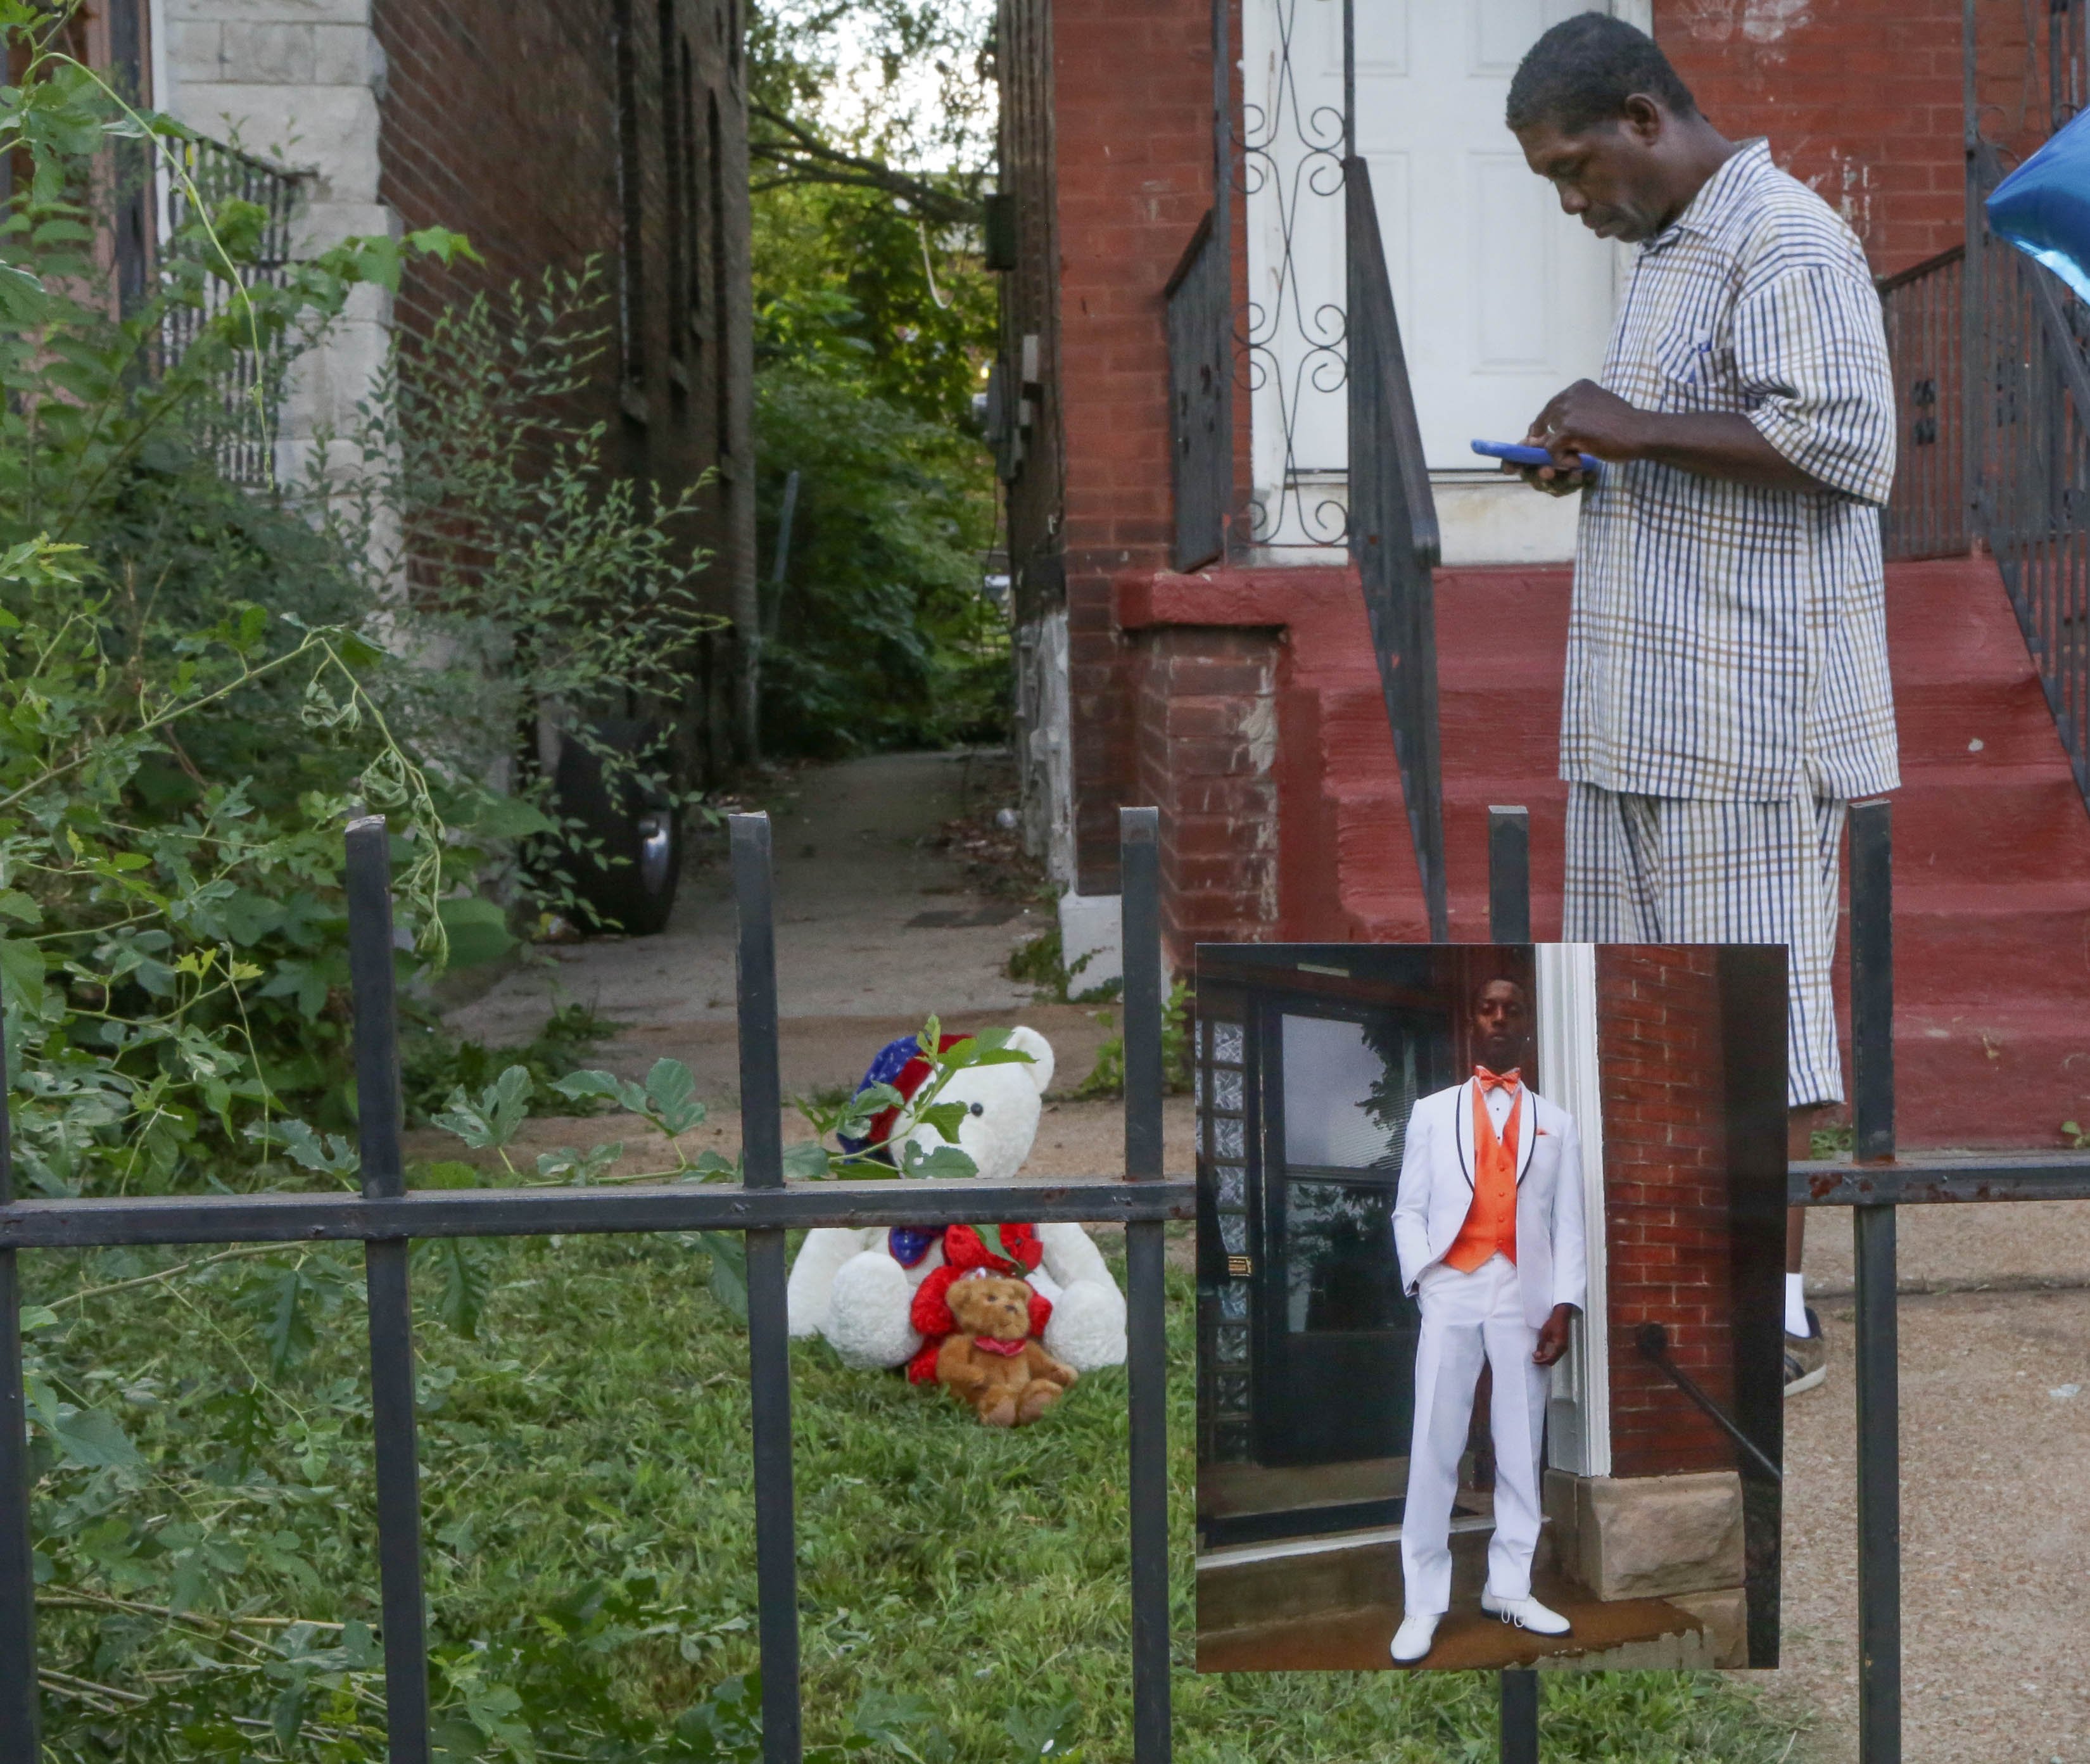 *Embargo: St. Louis, MO**

Father Dennis Ball-Bey stands in front of where police shot his son, Mansur Ball-Bey during his son's candel light vigil on Thursday, August 20, 2015 night. Mansur Ball-Bey was shot and killed by police after police say he pointa a gun at them. Protests took to the streets since then with police using tear gas to disperse demonstrators.